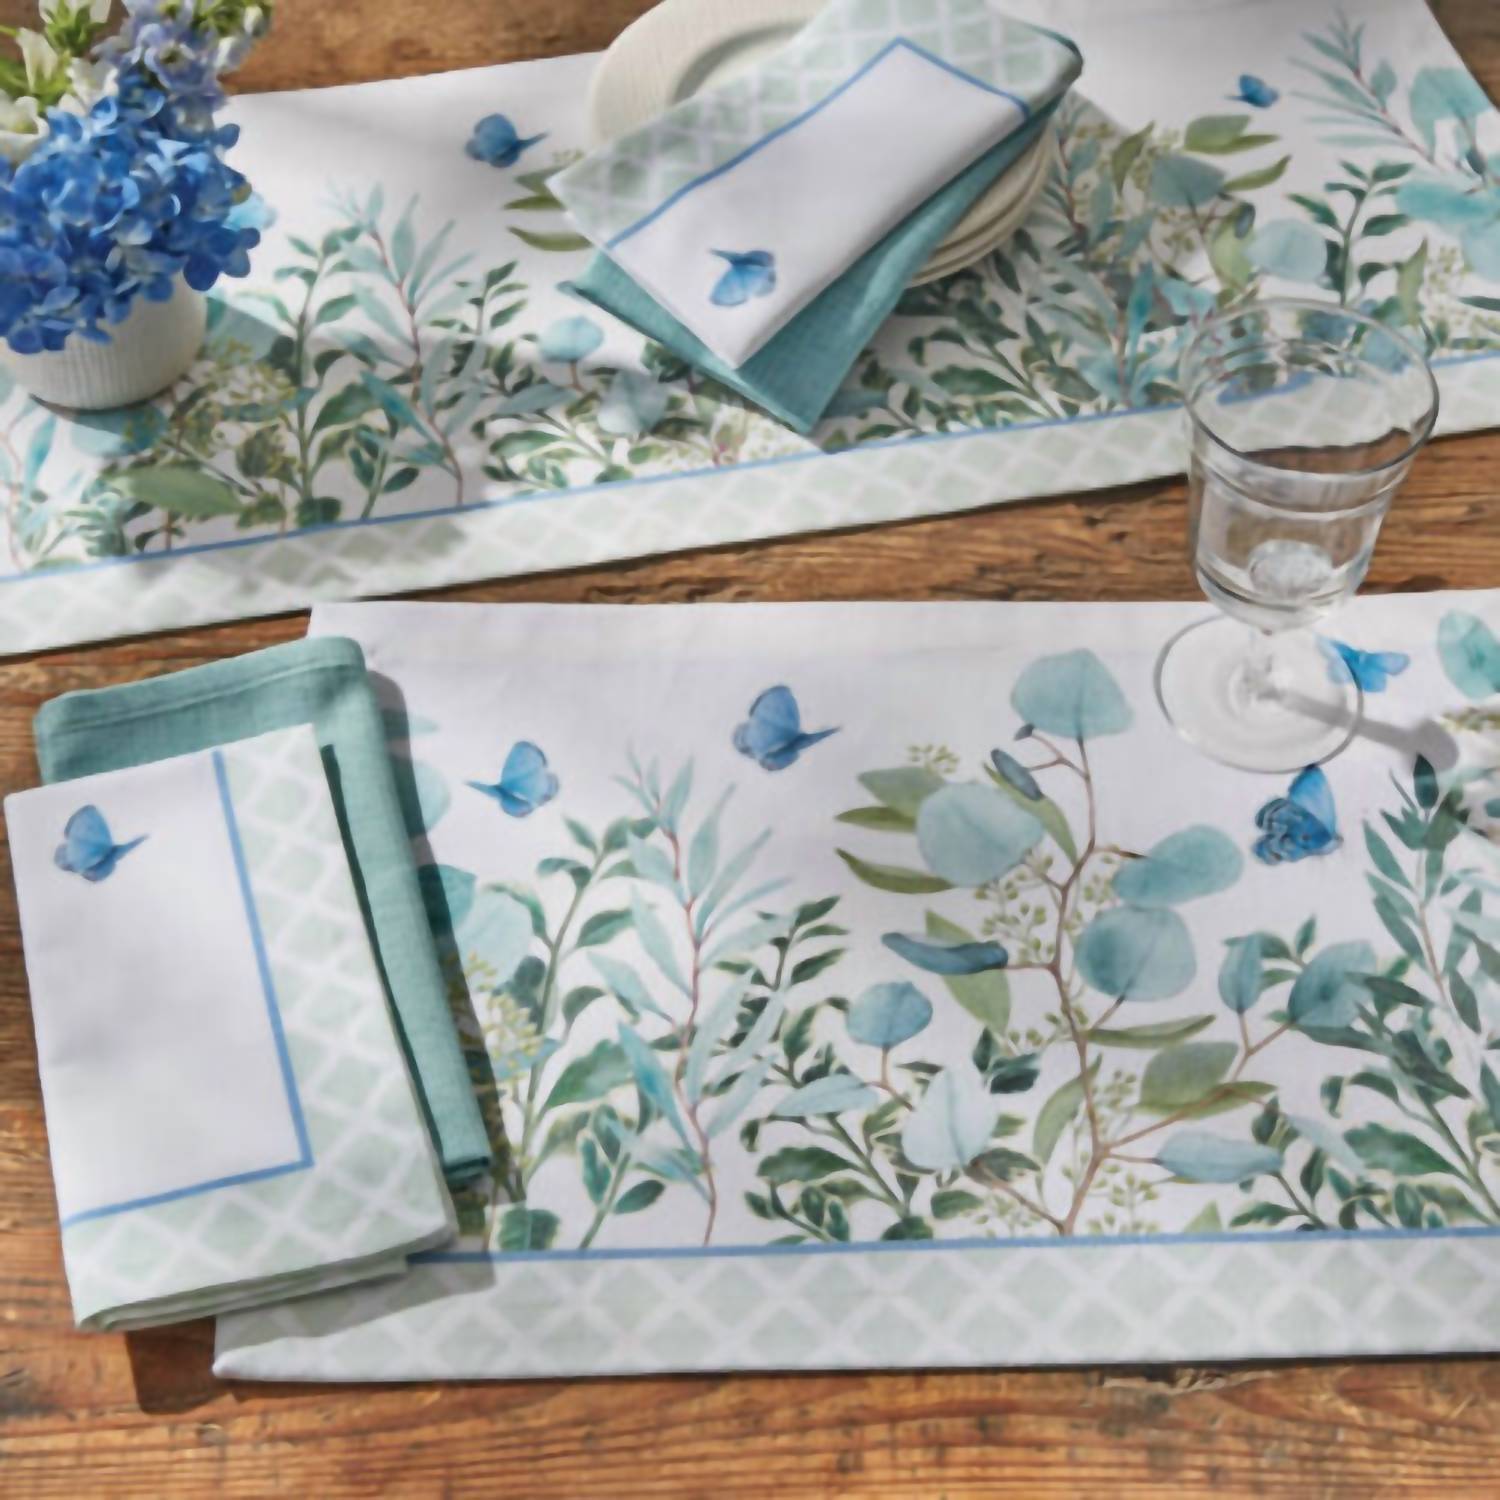 Primary image for Eucalyptus Greens Placemats - Set of 4